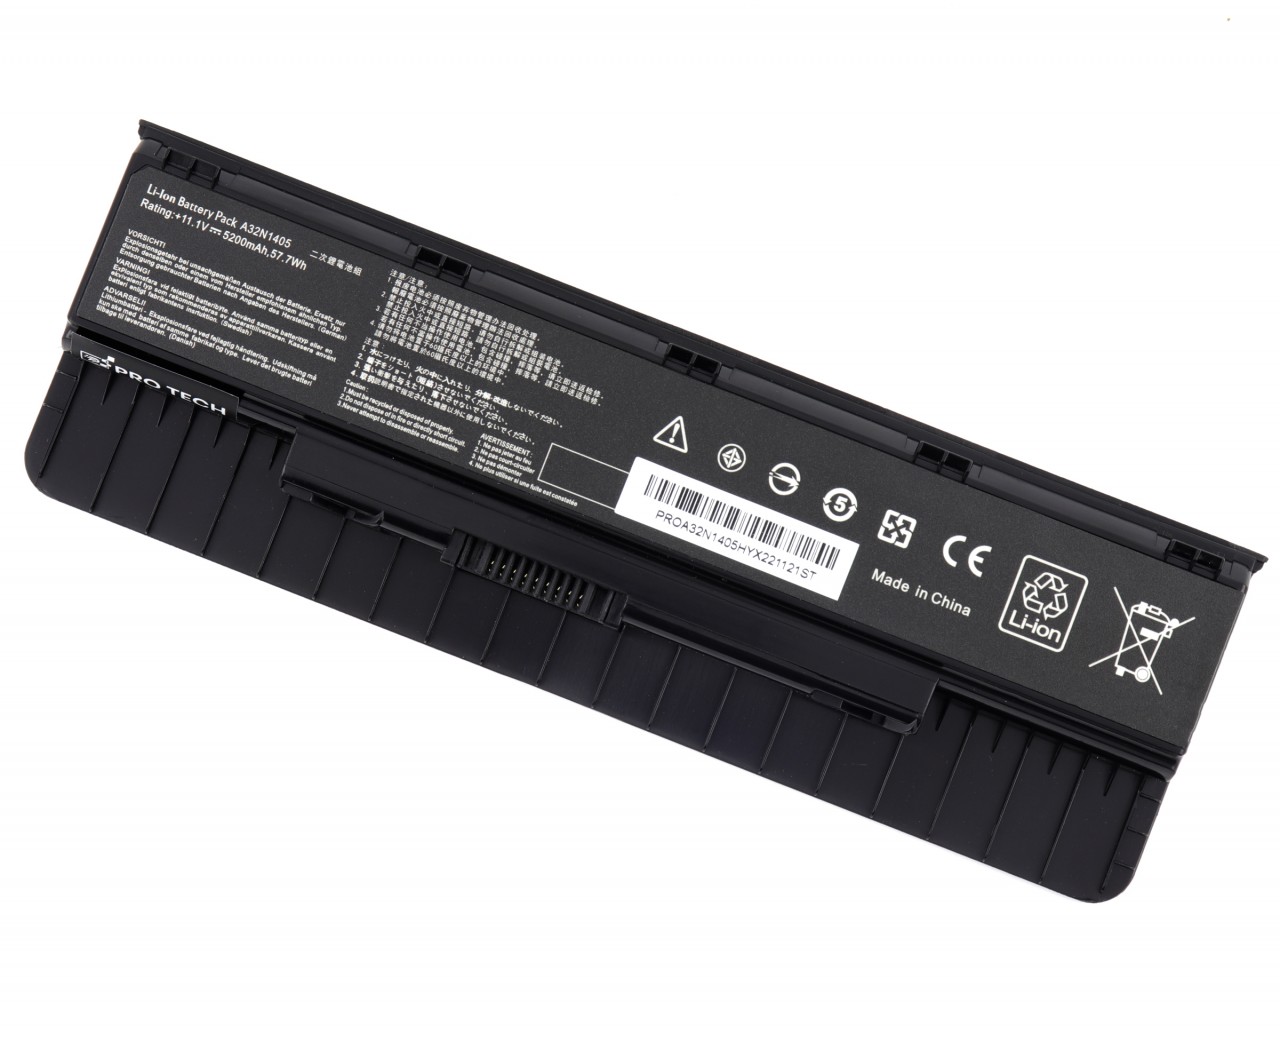 Baterie Asus N76VJ-T4024H 57.7Wh / 5200mAh Protech High Quality Replacement